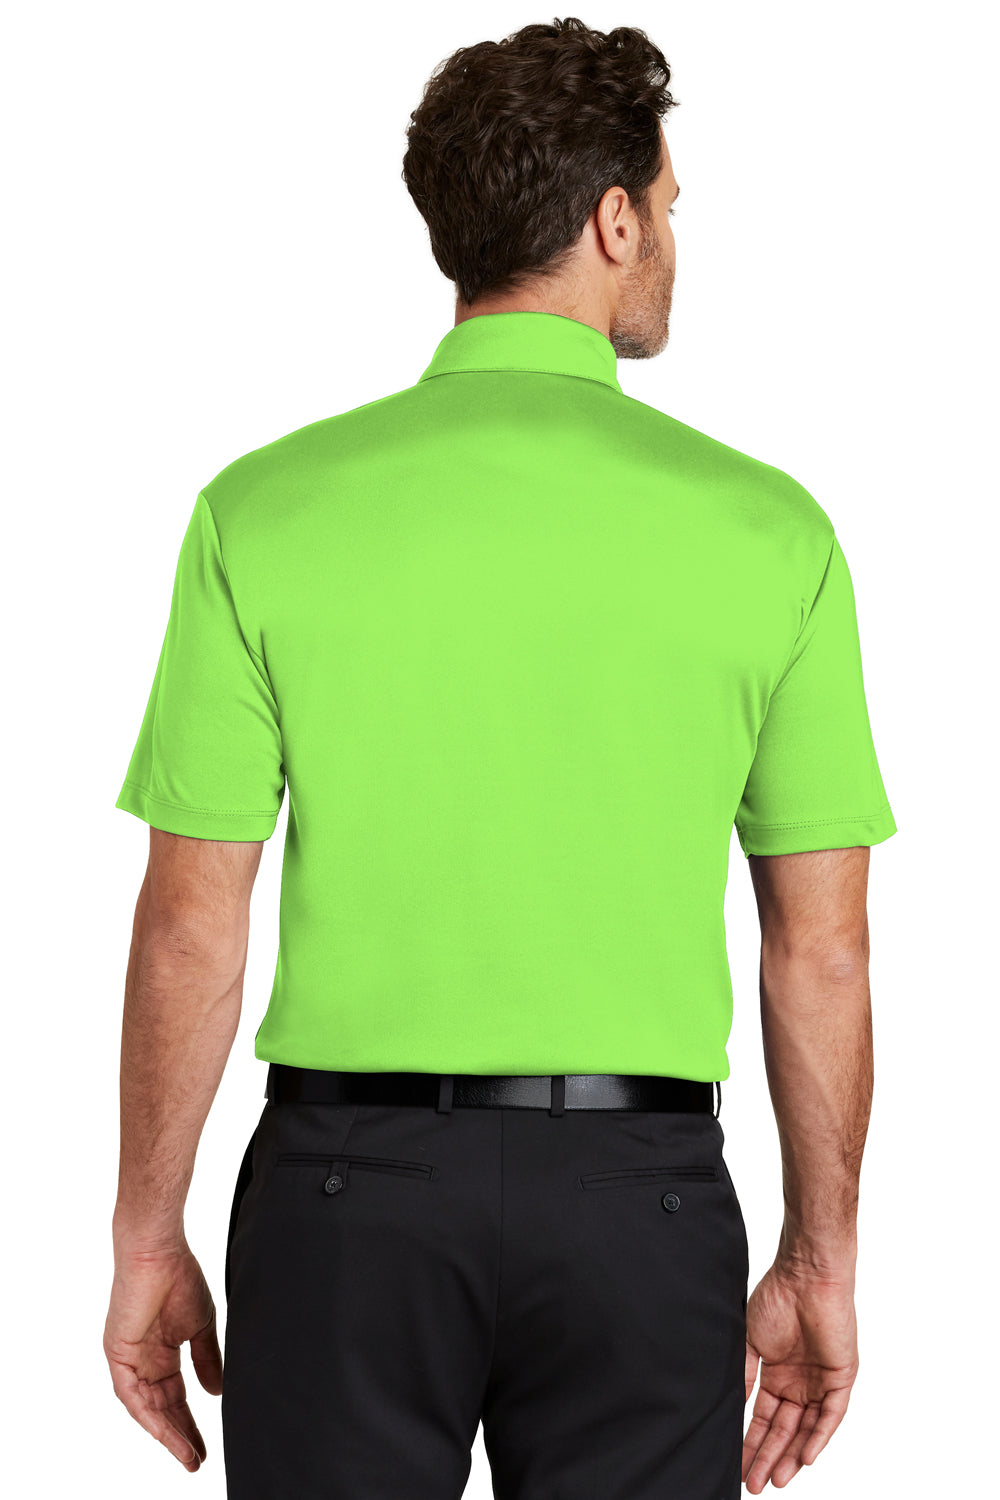 Port Authority K540 Mens Silk Touch Performance Moisture Wicking Short Sleeve Polo Shirt Lime Green Back